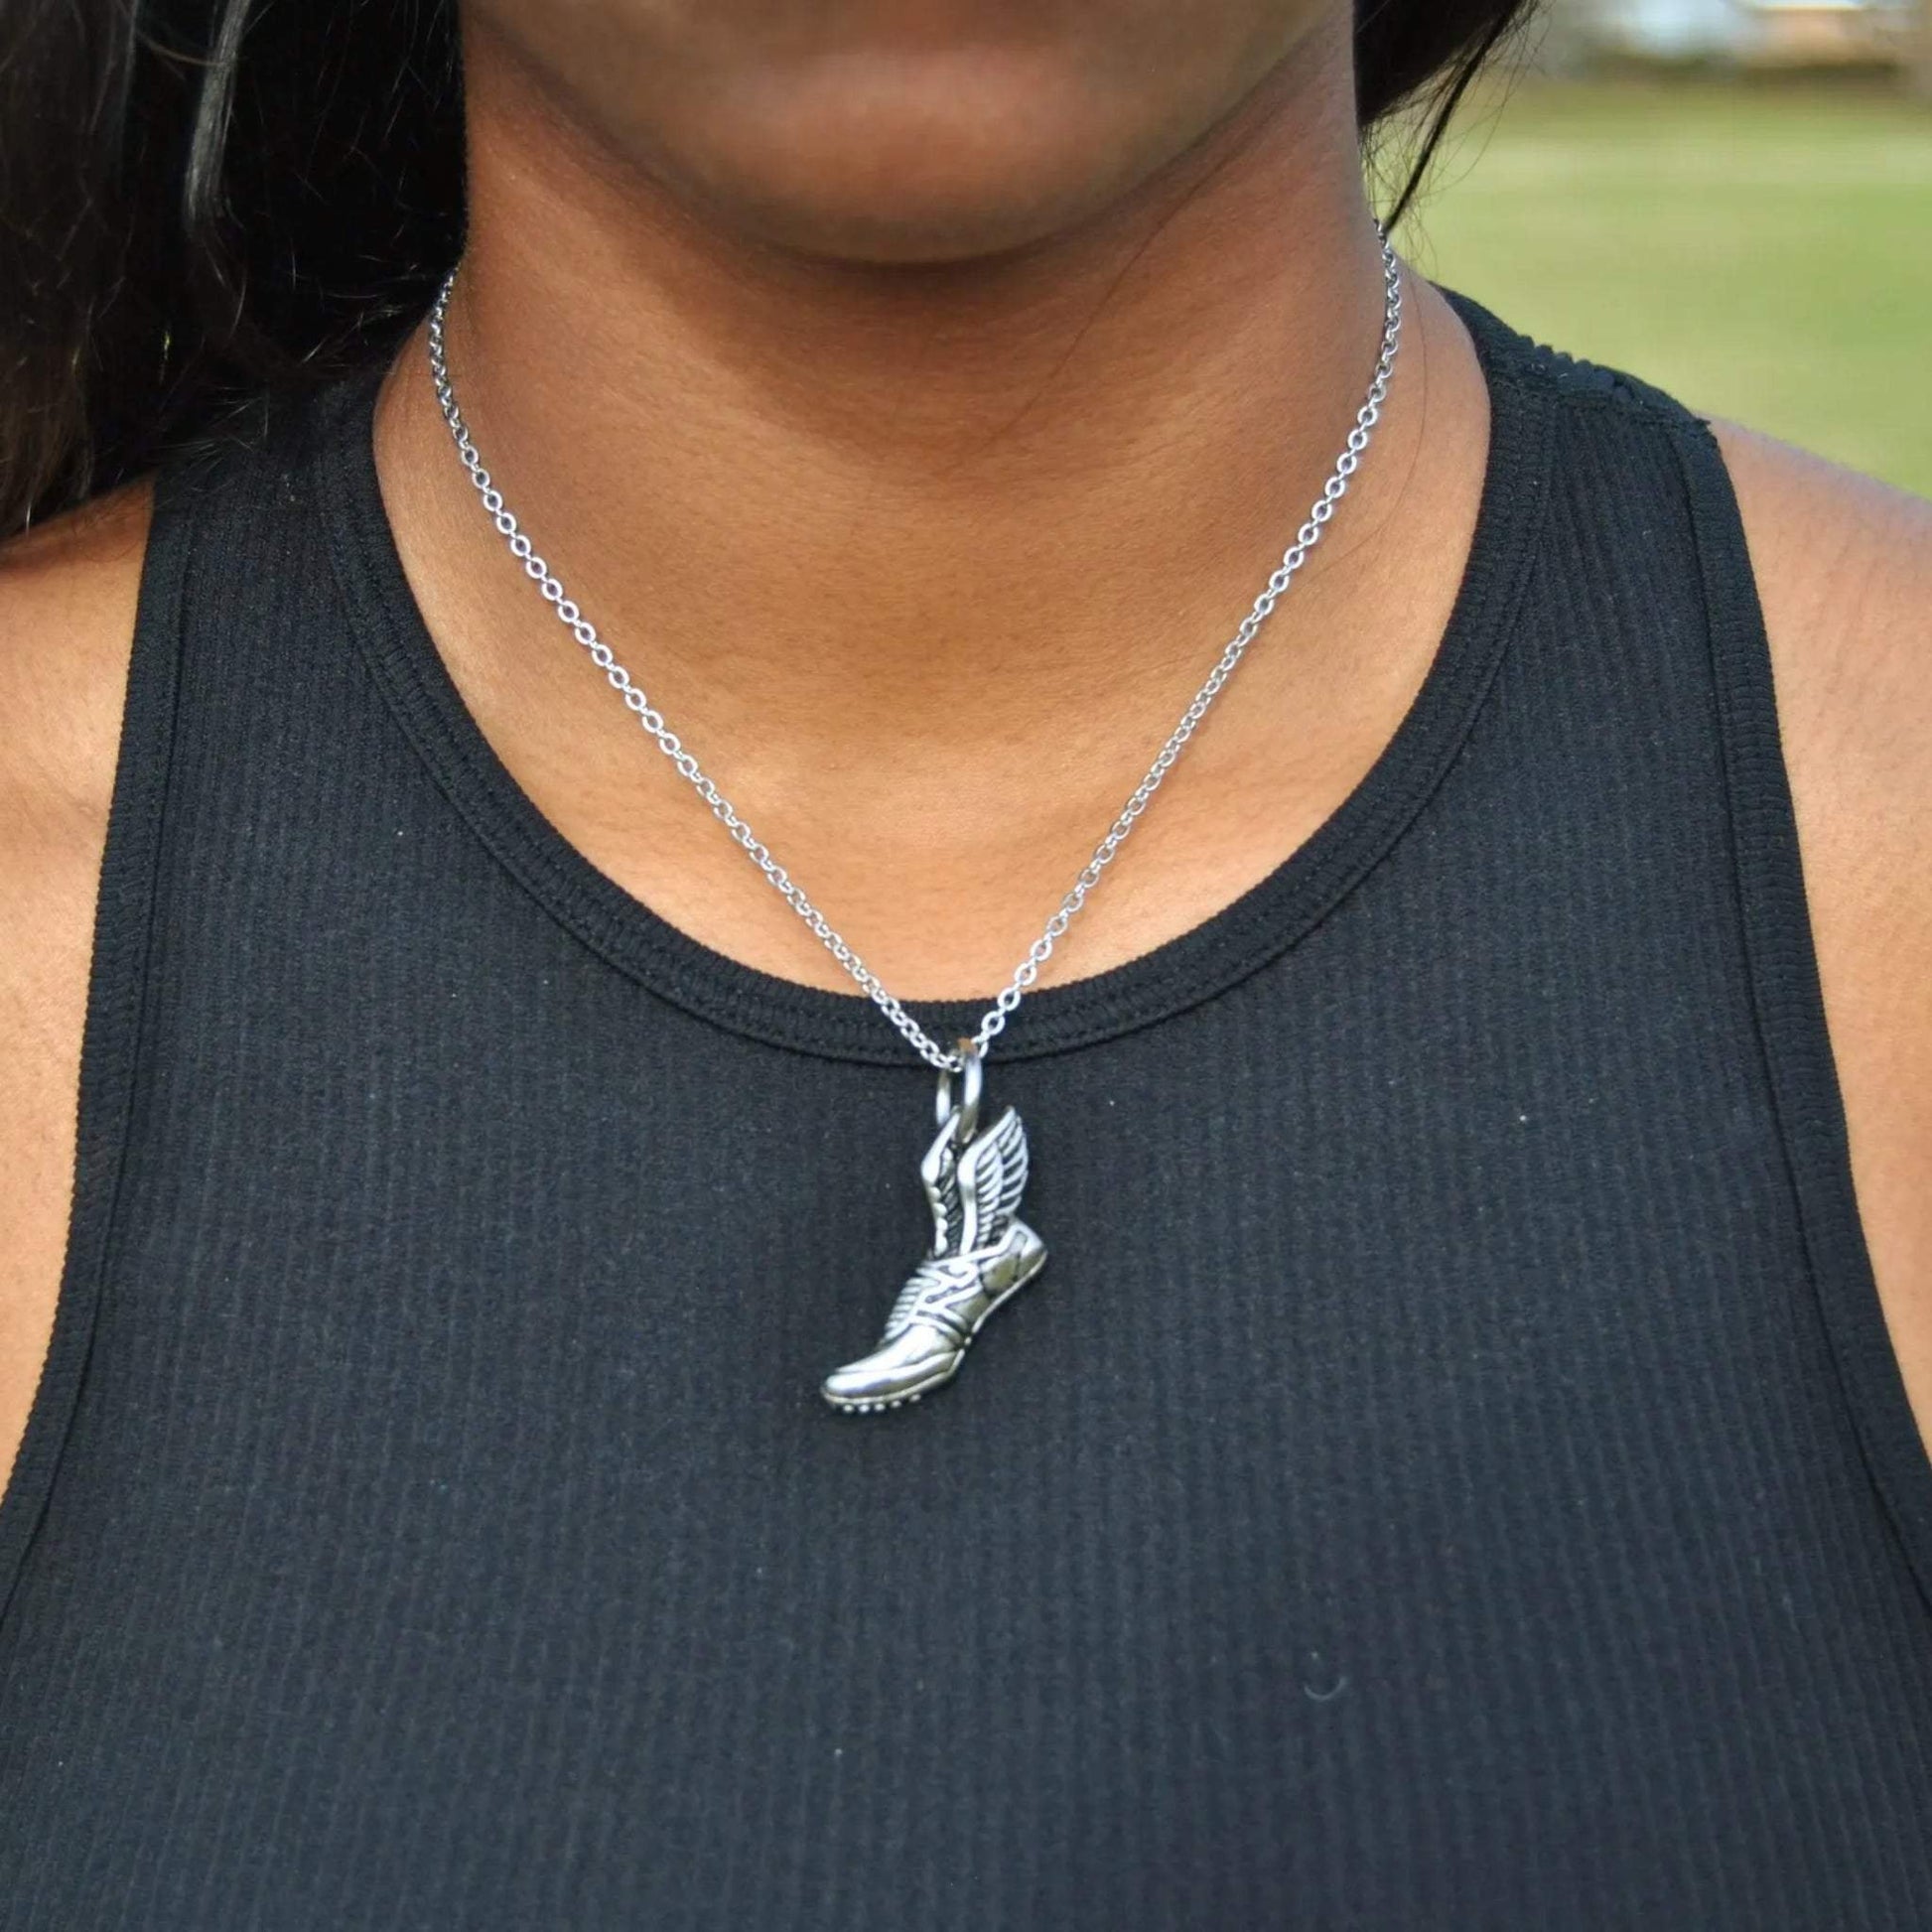 Winged Running Shoe Pendant and Chain Necklace-SLVR-RUN-CLT-24